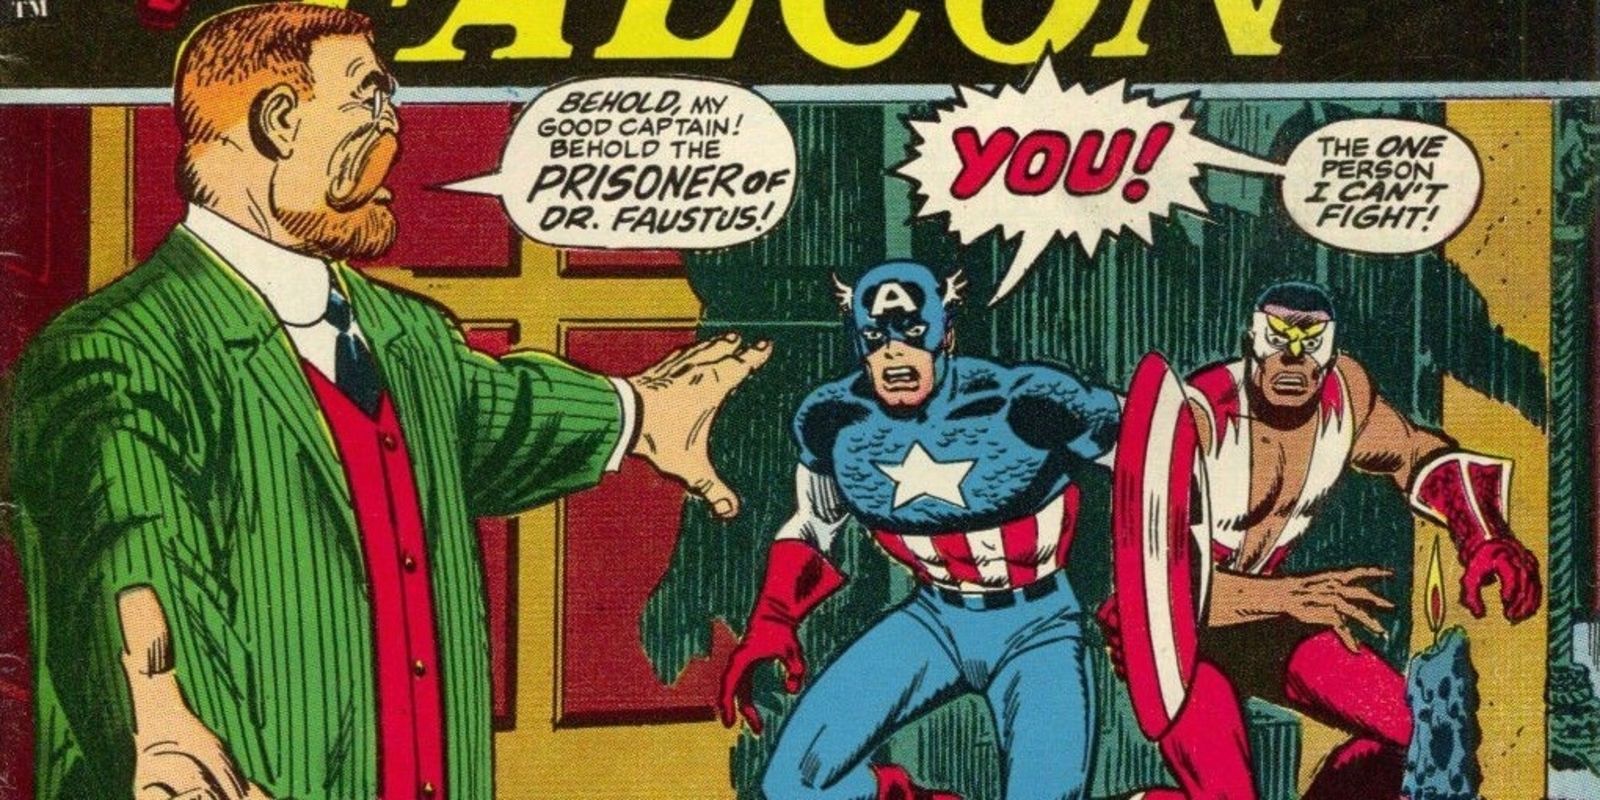 Dr. Faustus captures Captain America and Falcon